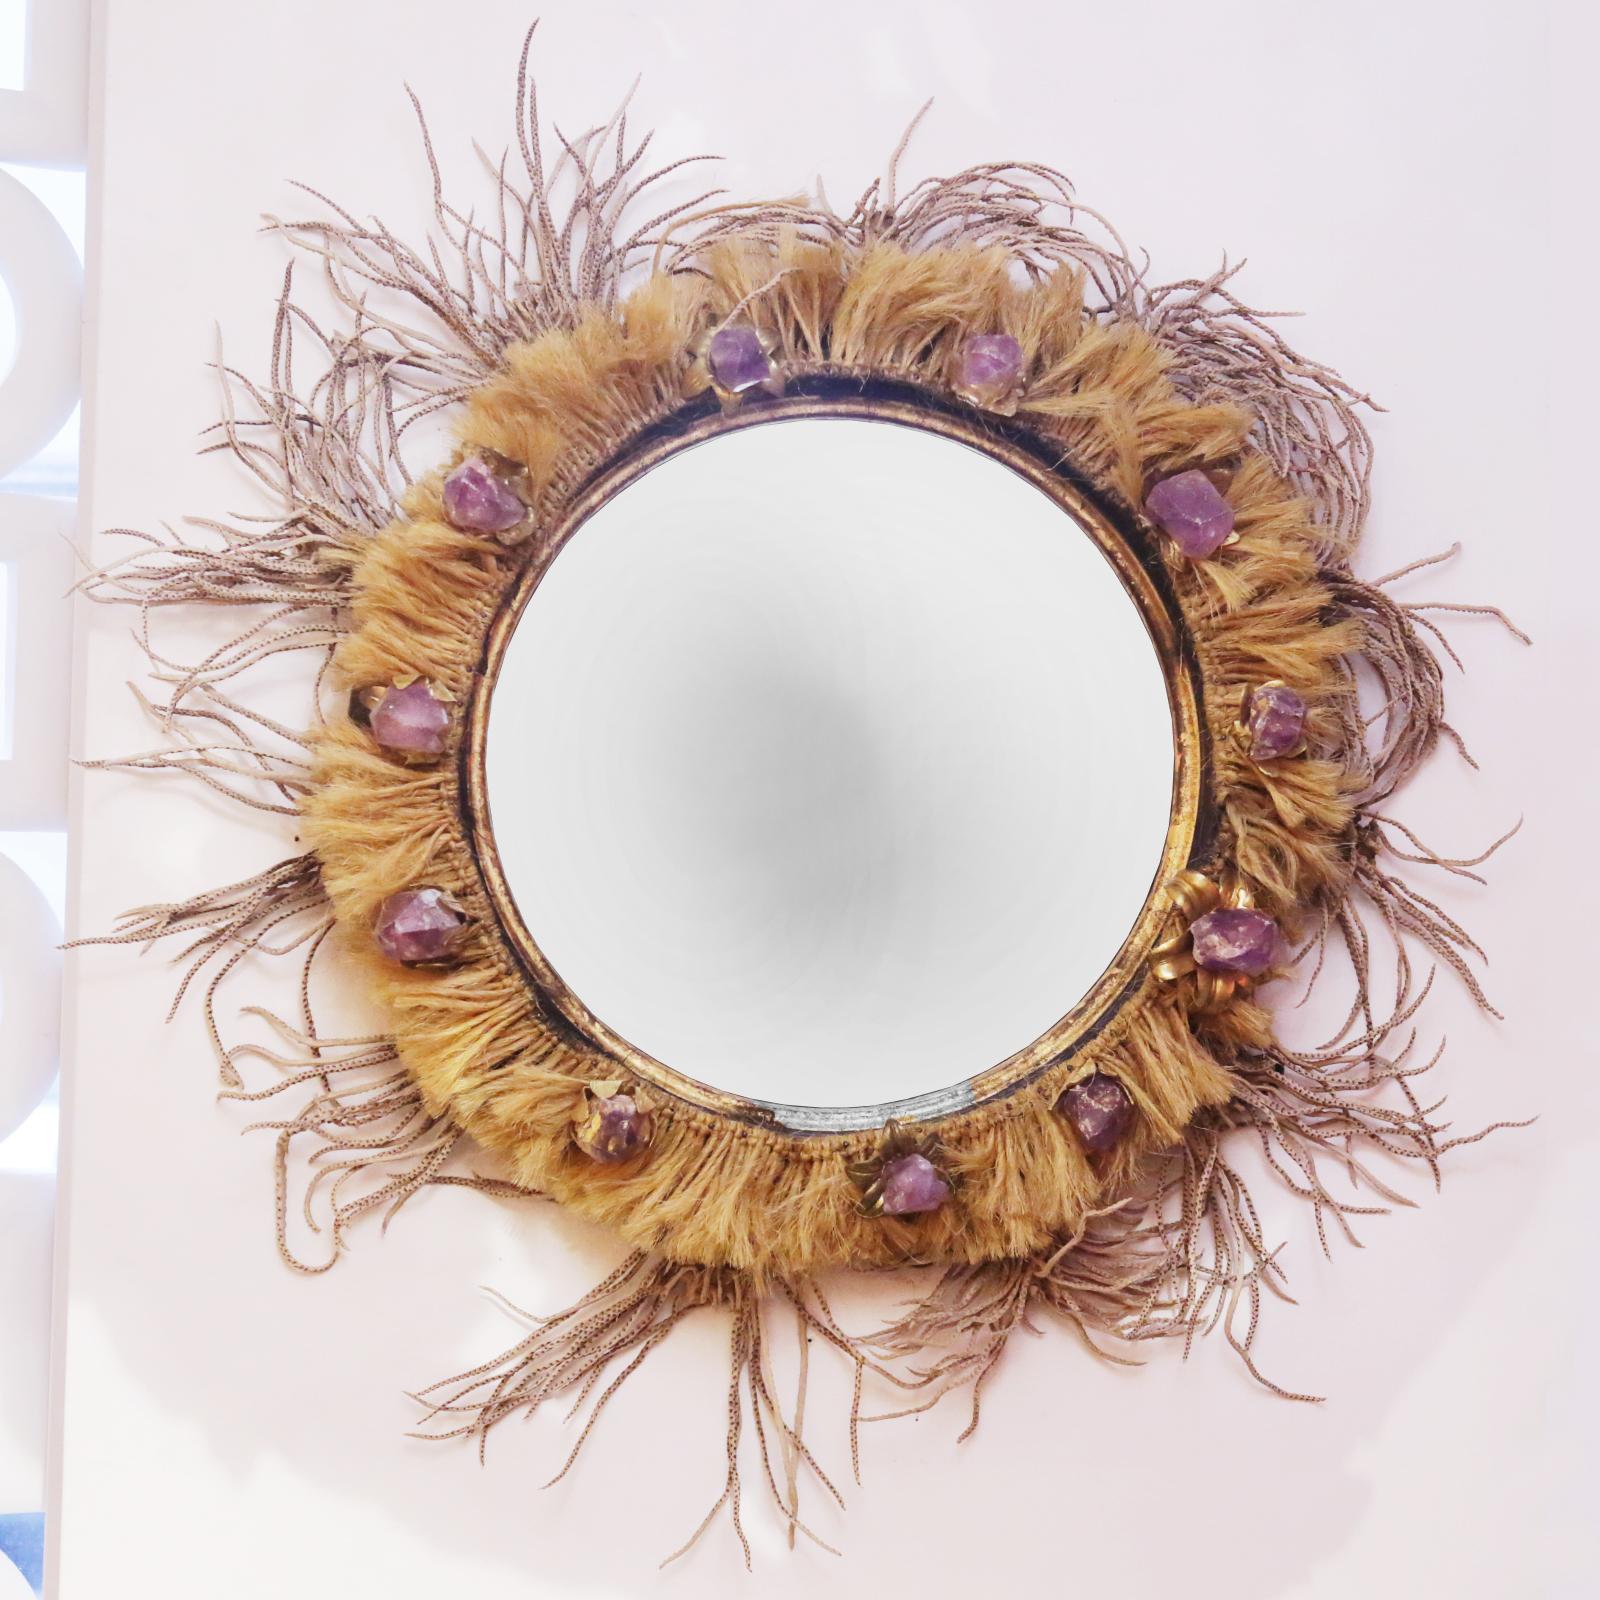 Mirror amethyst with frame in solid wood
in vintage gold finish, surrounded with pure
amethyst stones from Brazil and with natural
vegan lianes. With convex mirror glass.
Exceptional and unique piece.
Made in France in 2019.